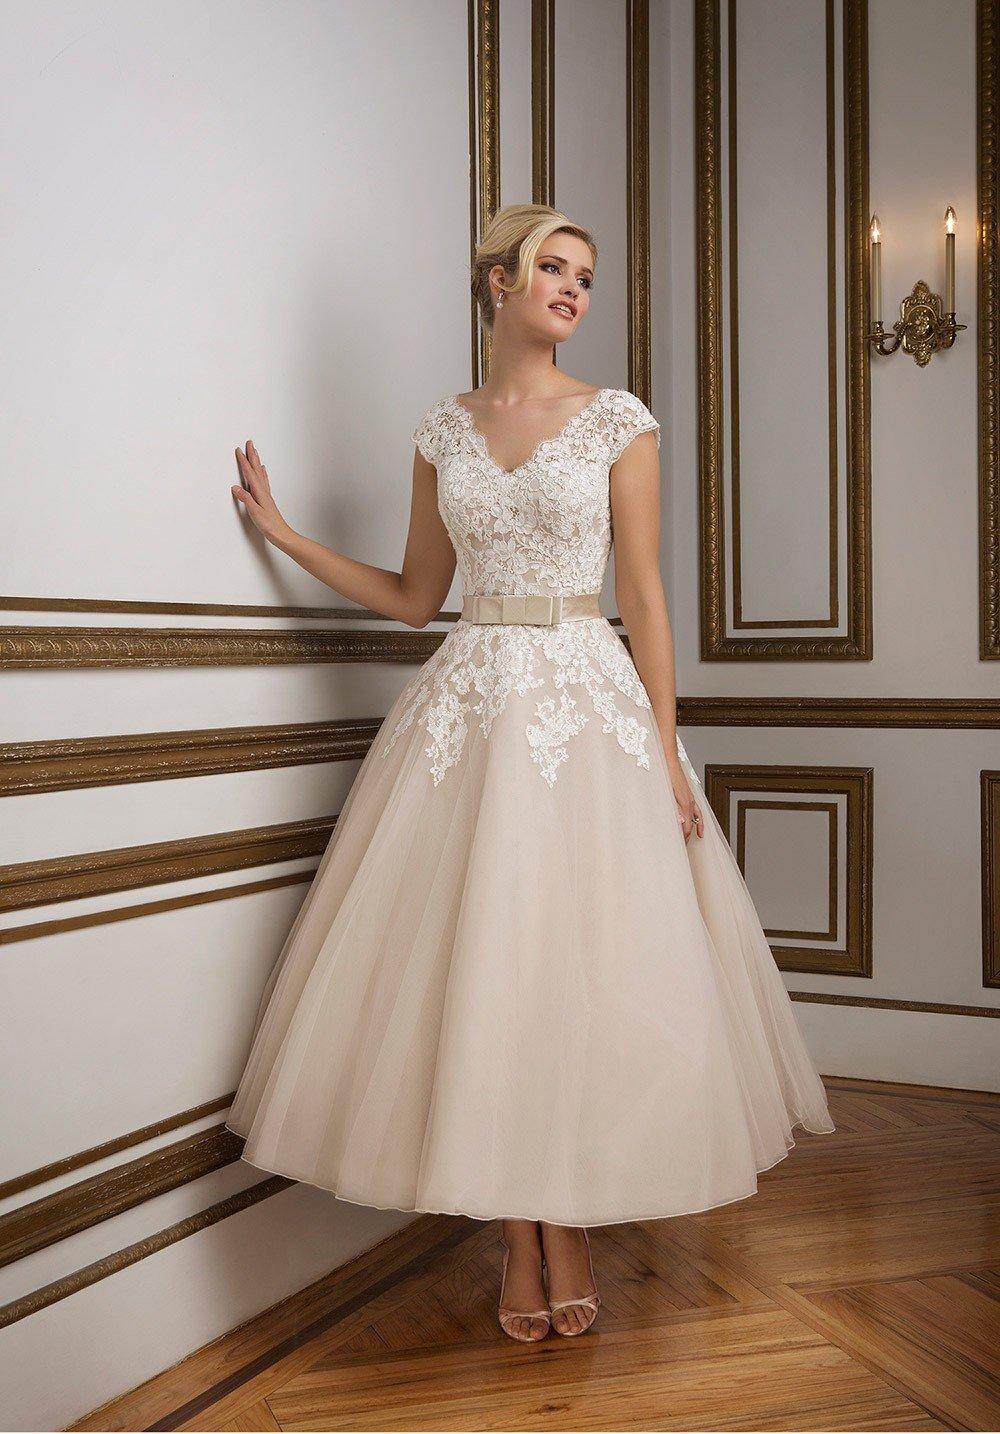 Our Favourite 1950S Inspired Wedding Dresses - Hitched.Co.Uk - Hitched.Co.Uk